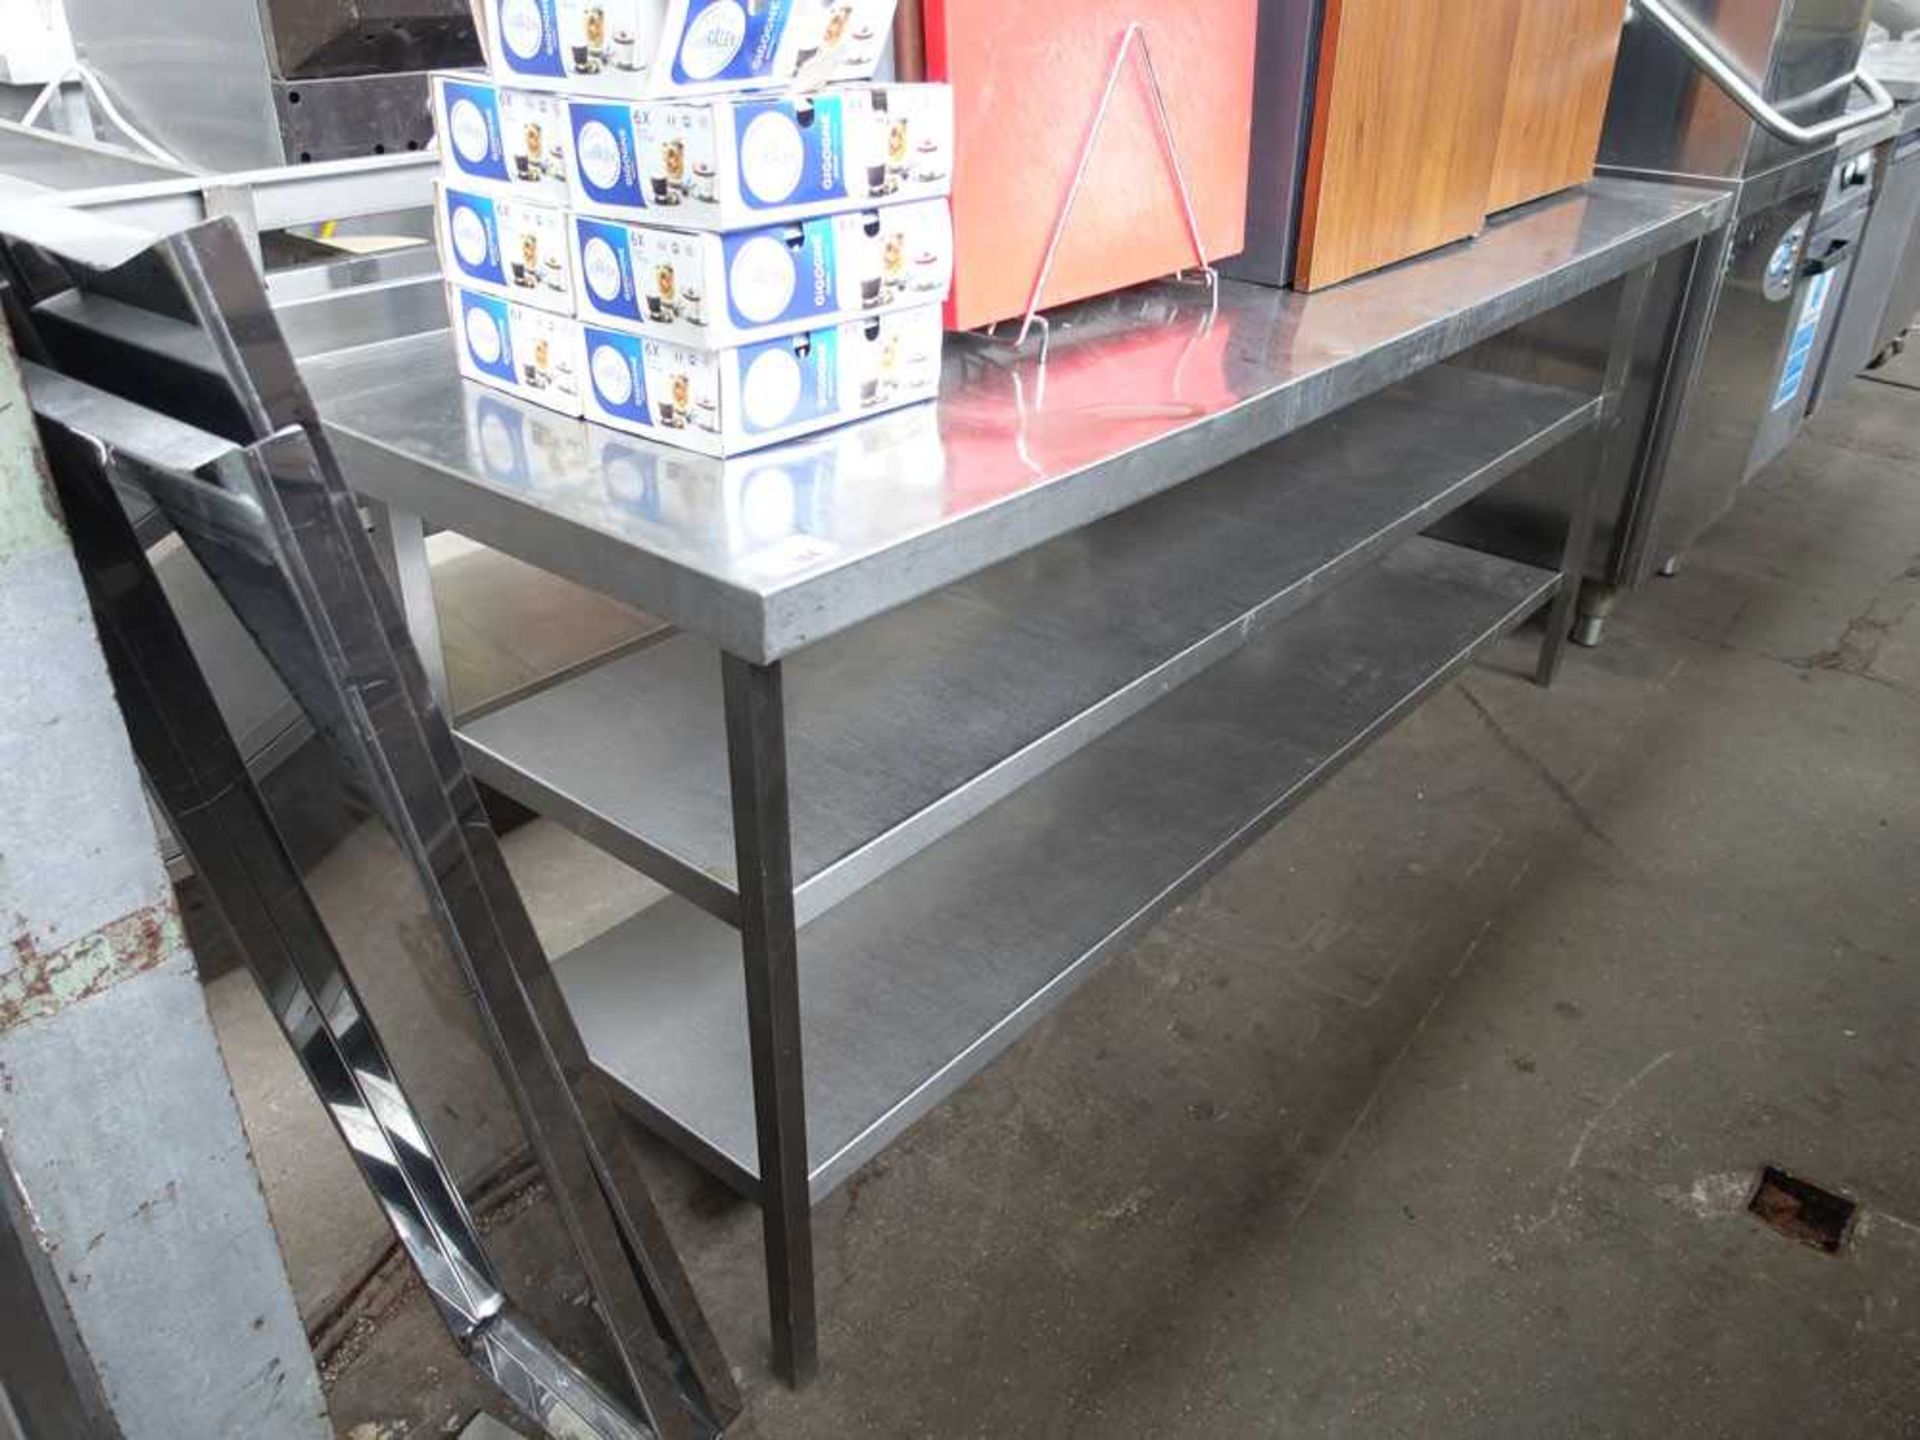 +VAT 200cm stainless steel preparation table with 2 shelves under